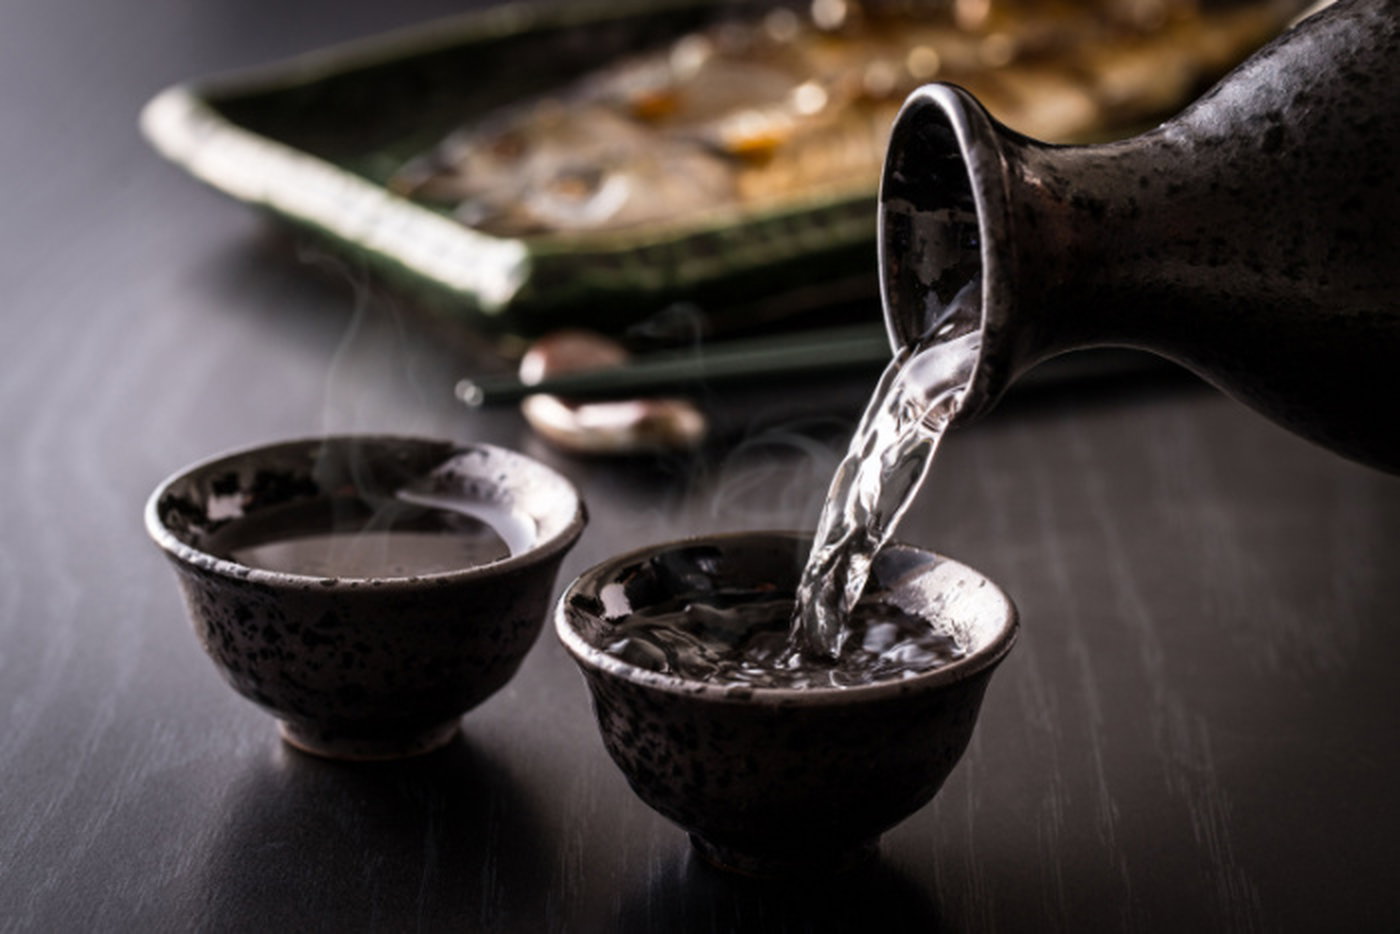 Hot Japanese sake being poured into two small black cups